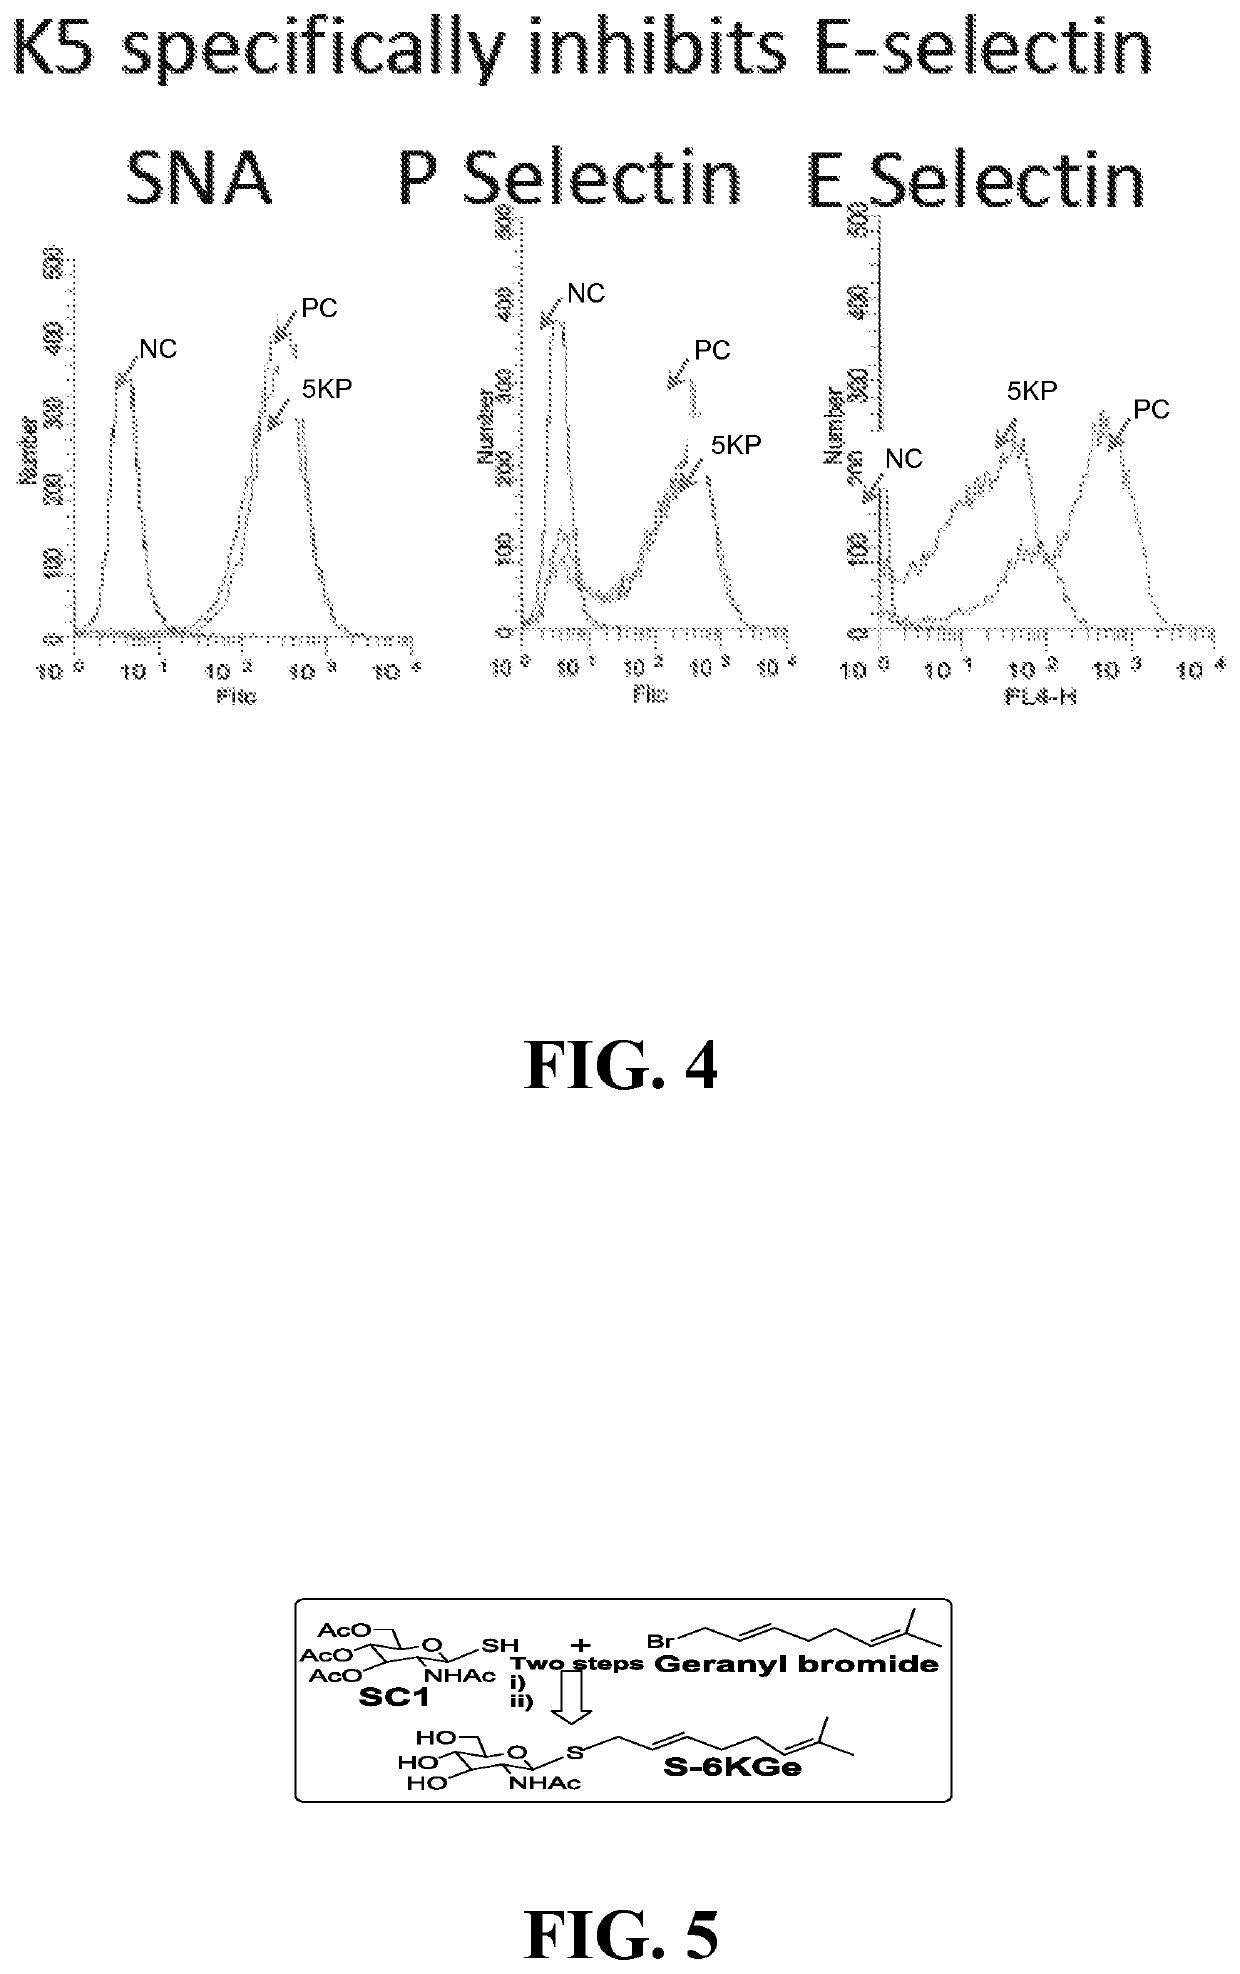 Compositions, methods and treatments for inhibiting cell adhesion and virus binding and penetration